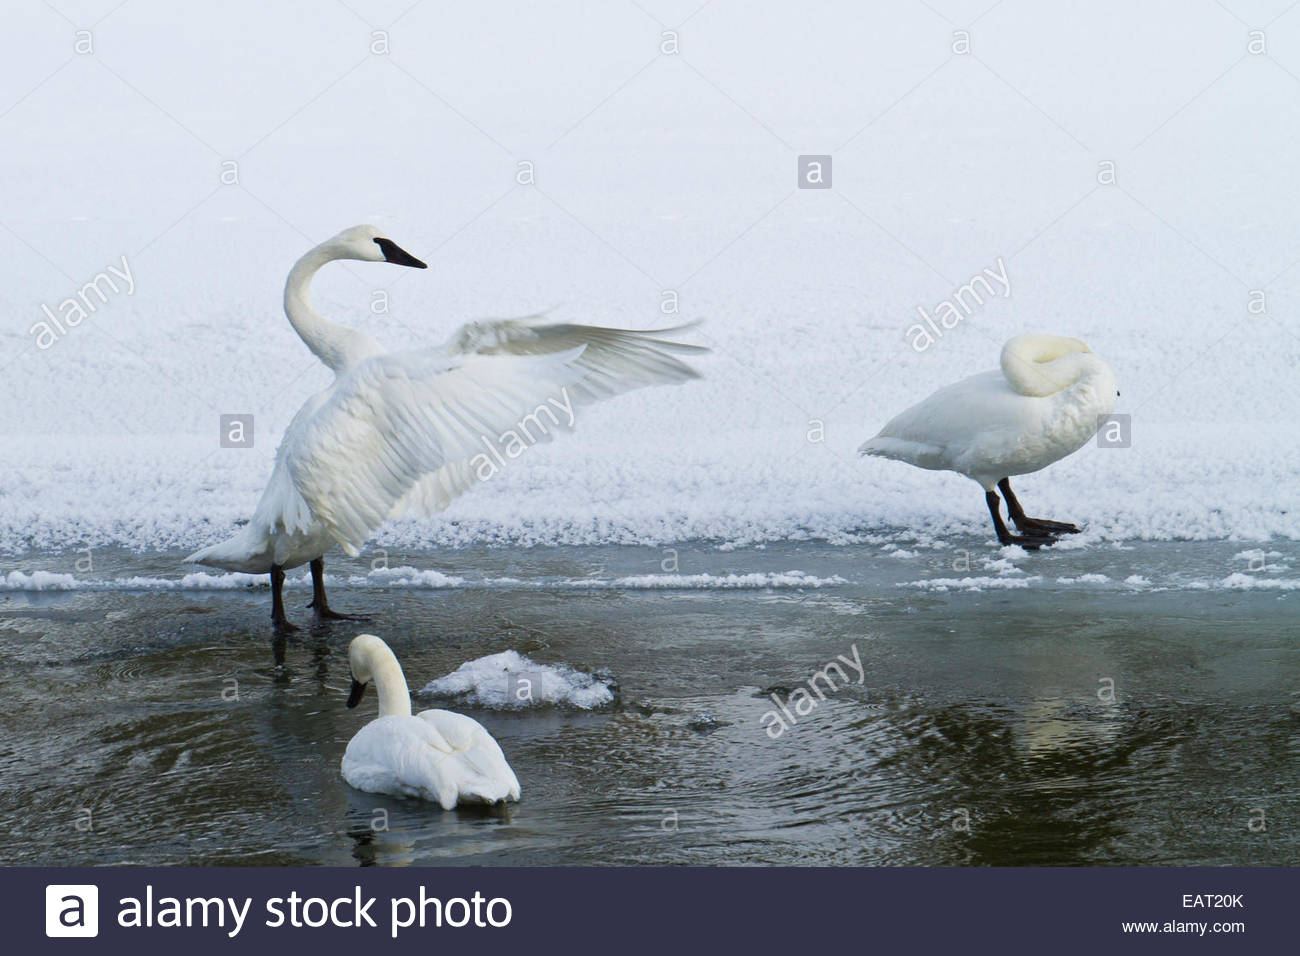 Trumpeter swans, the largest native North American birds in a river. Stock Photo